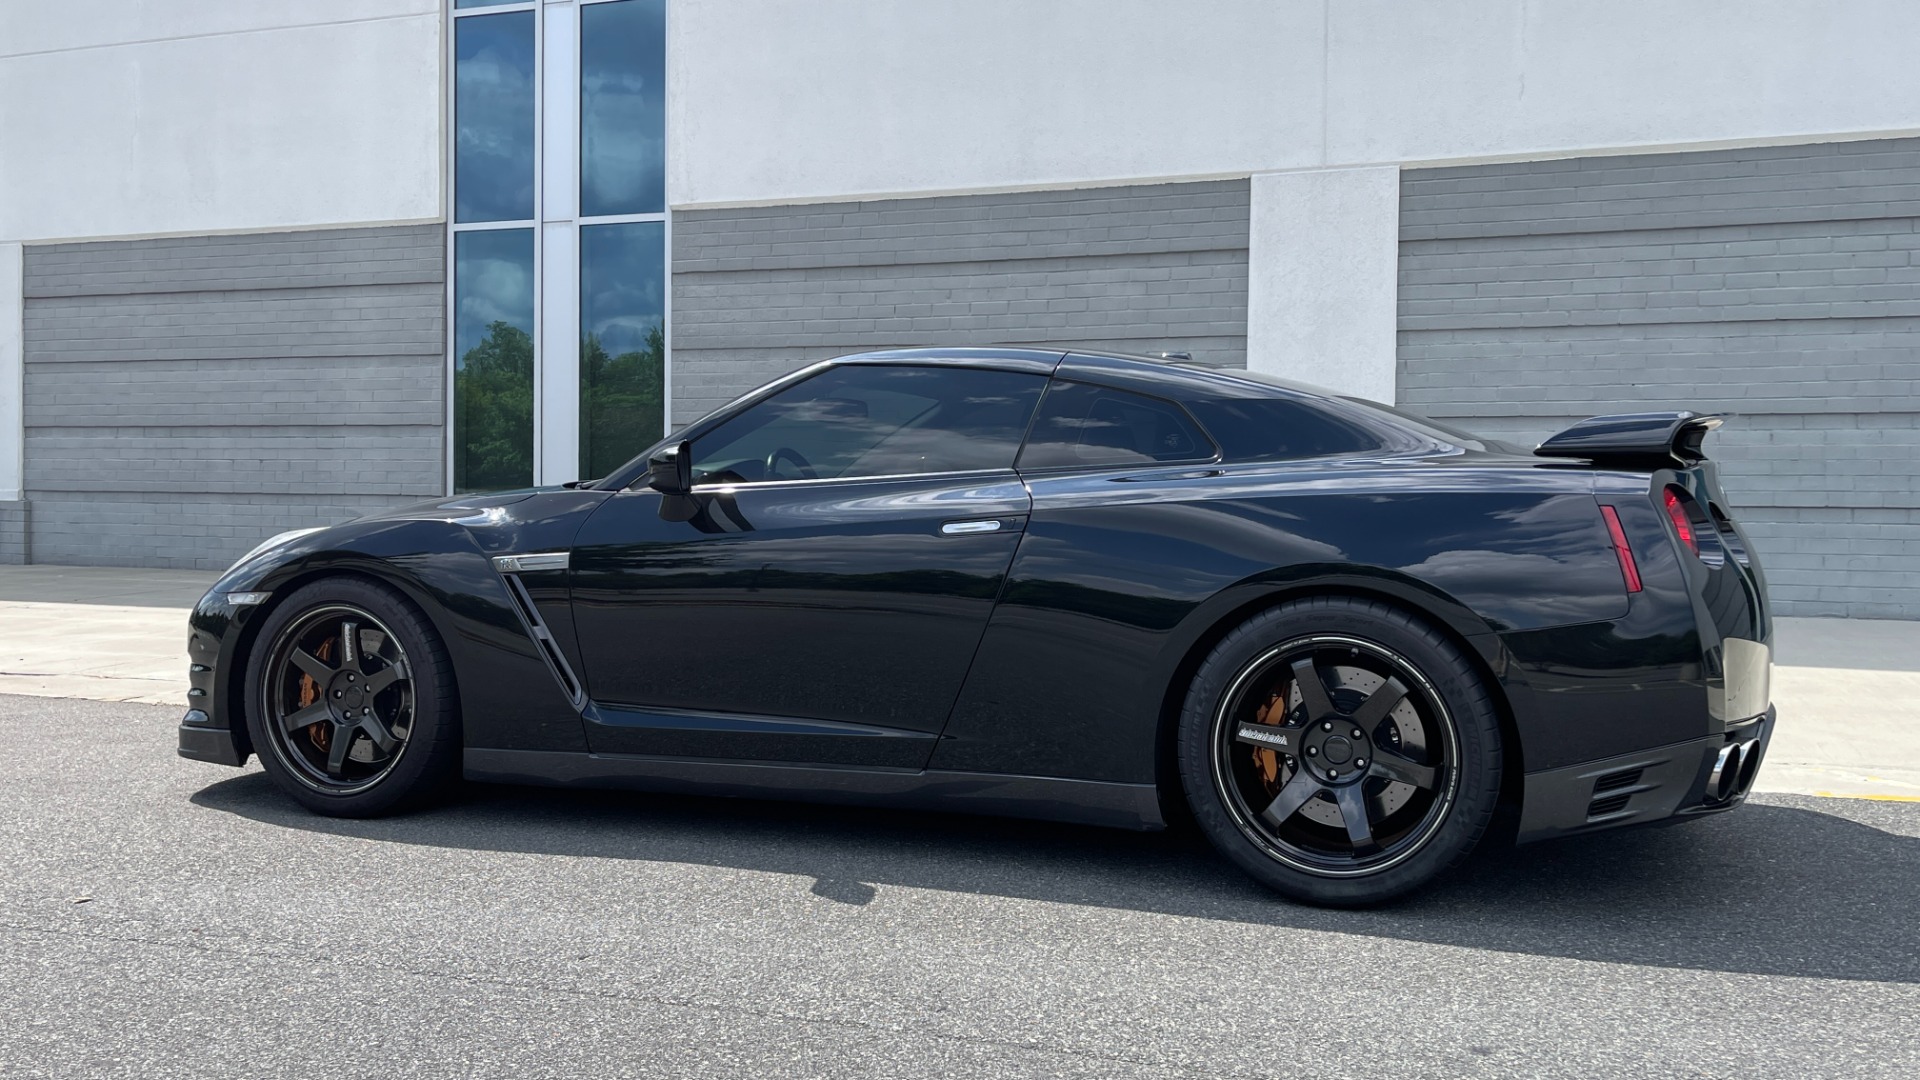 Used 2013 Nissan GT-R PREMIUM COUPE / 3.8L TWIN-TURBO / 6-SPD AUTO / COLD WTHR PKG / CAMERA for sale $70,995 at Formula Imports in Charlotte NC 28227 5